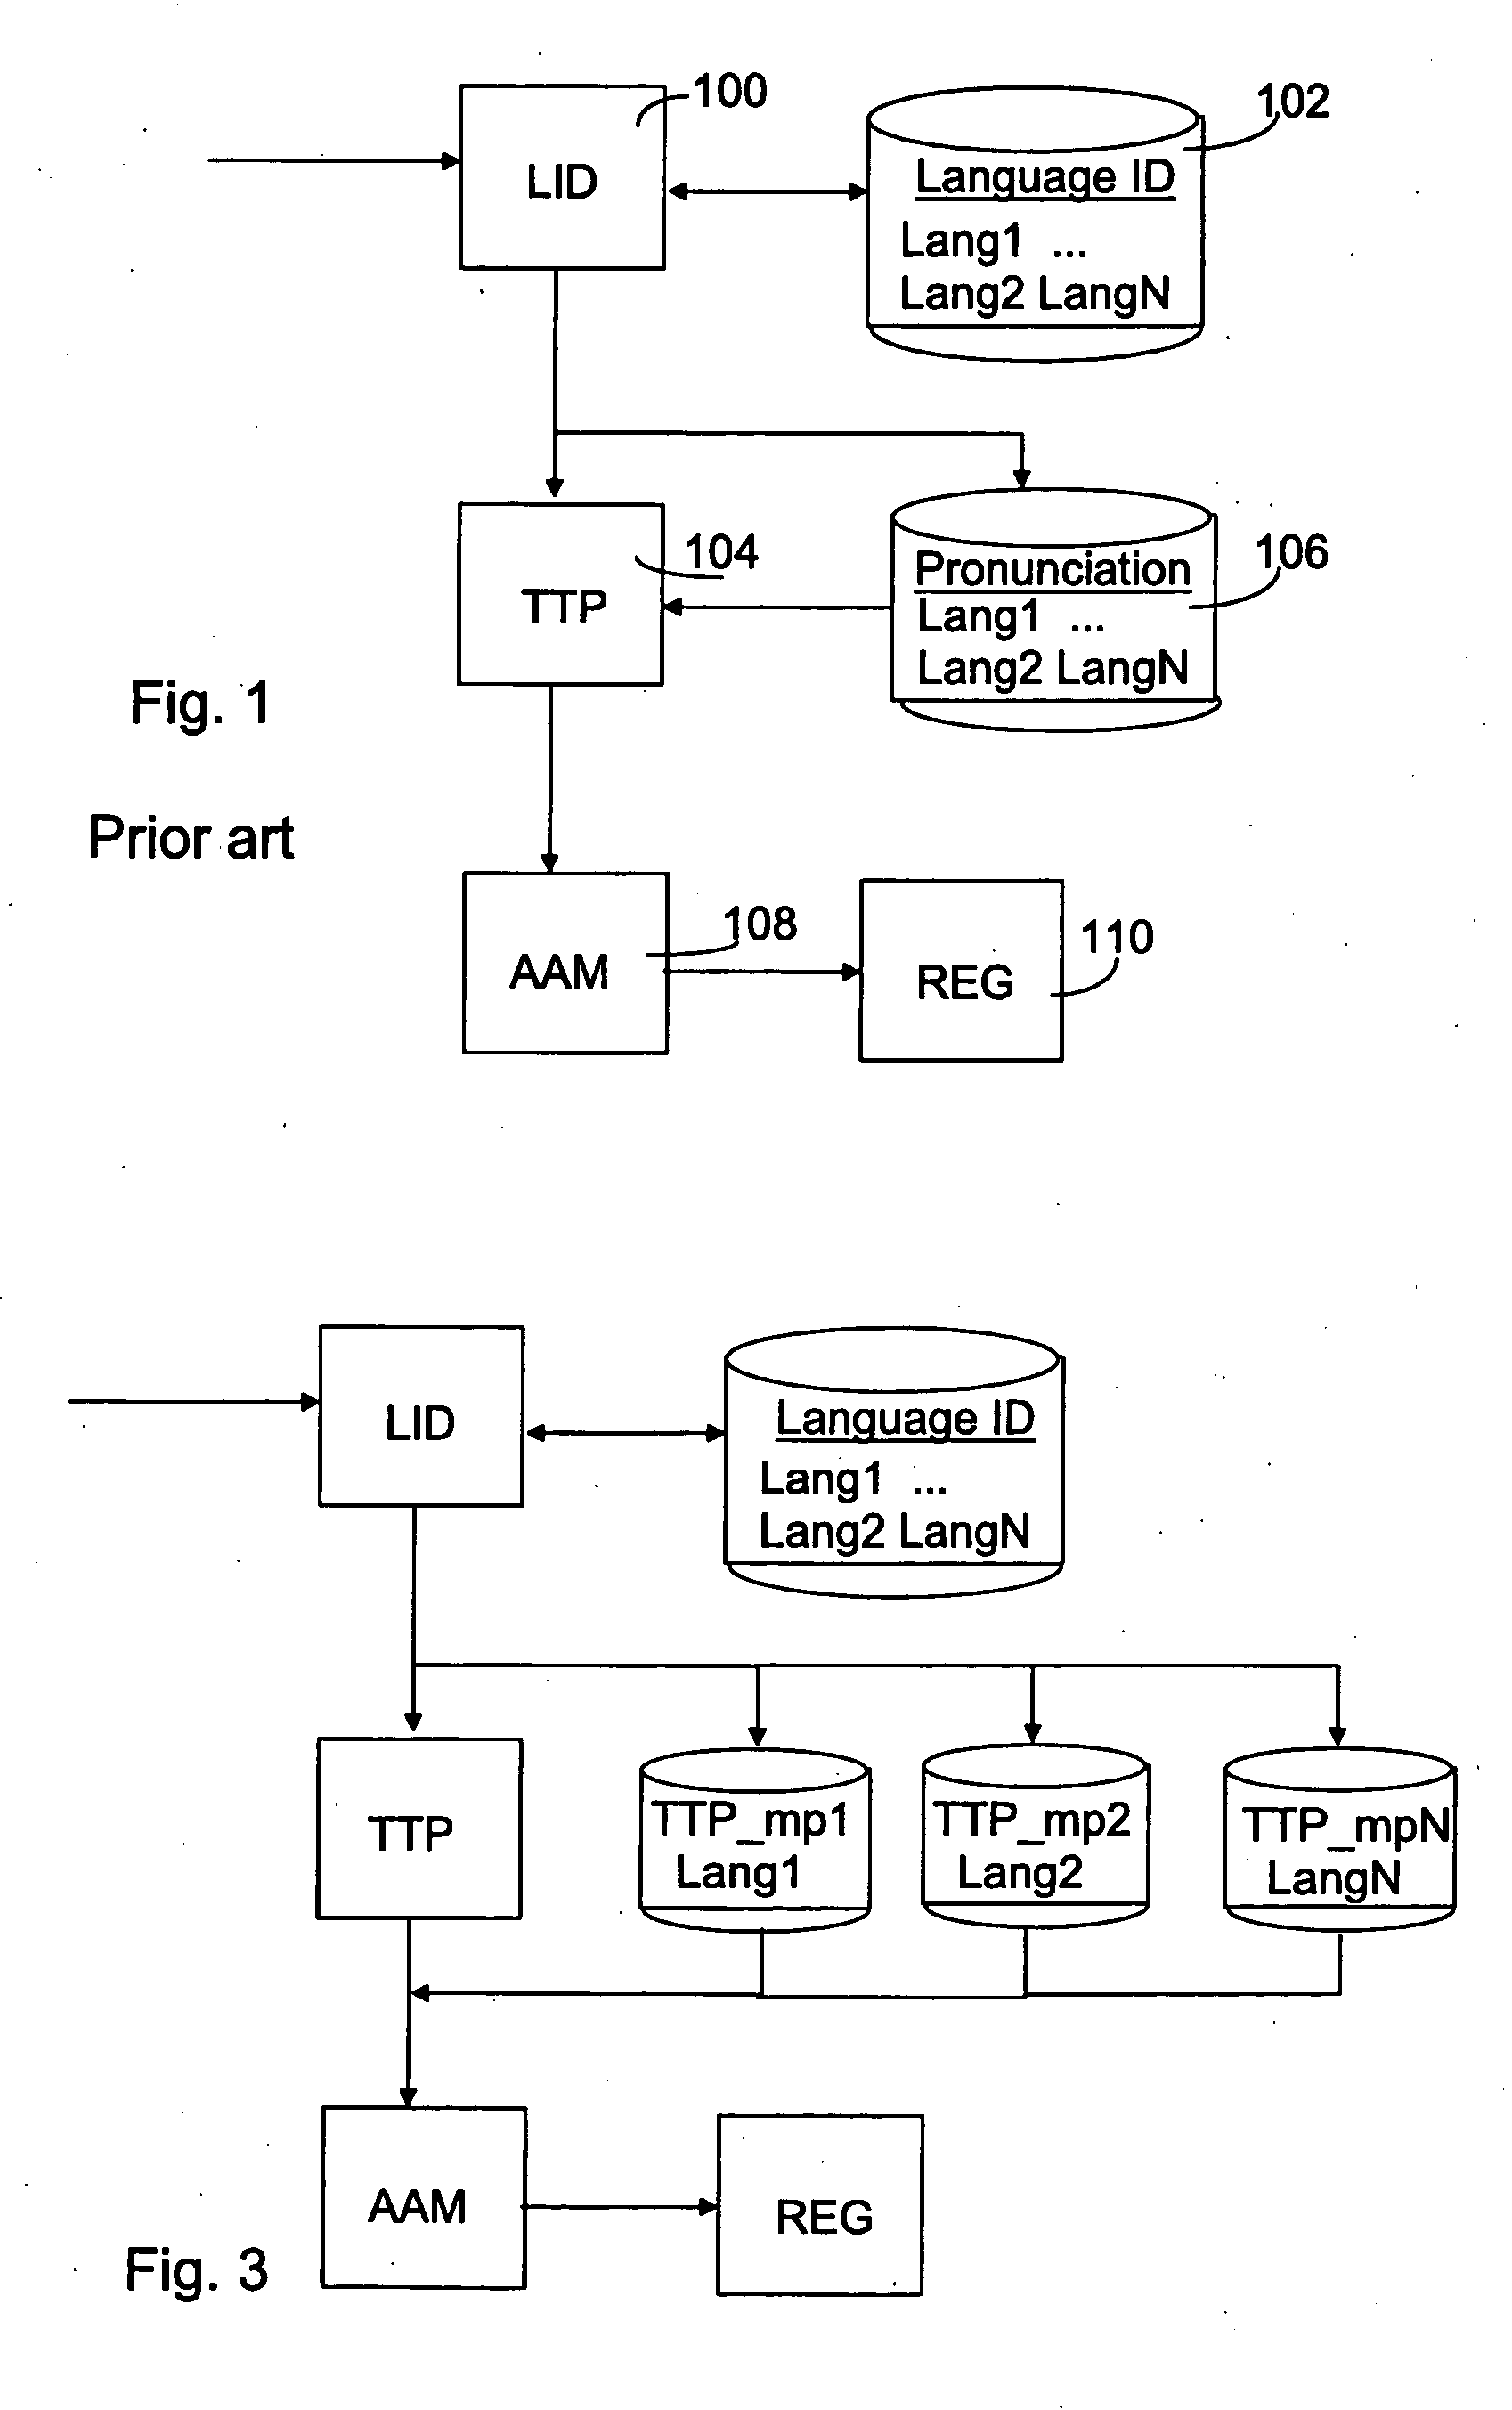 Enhanced multilingual speech recognition system